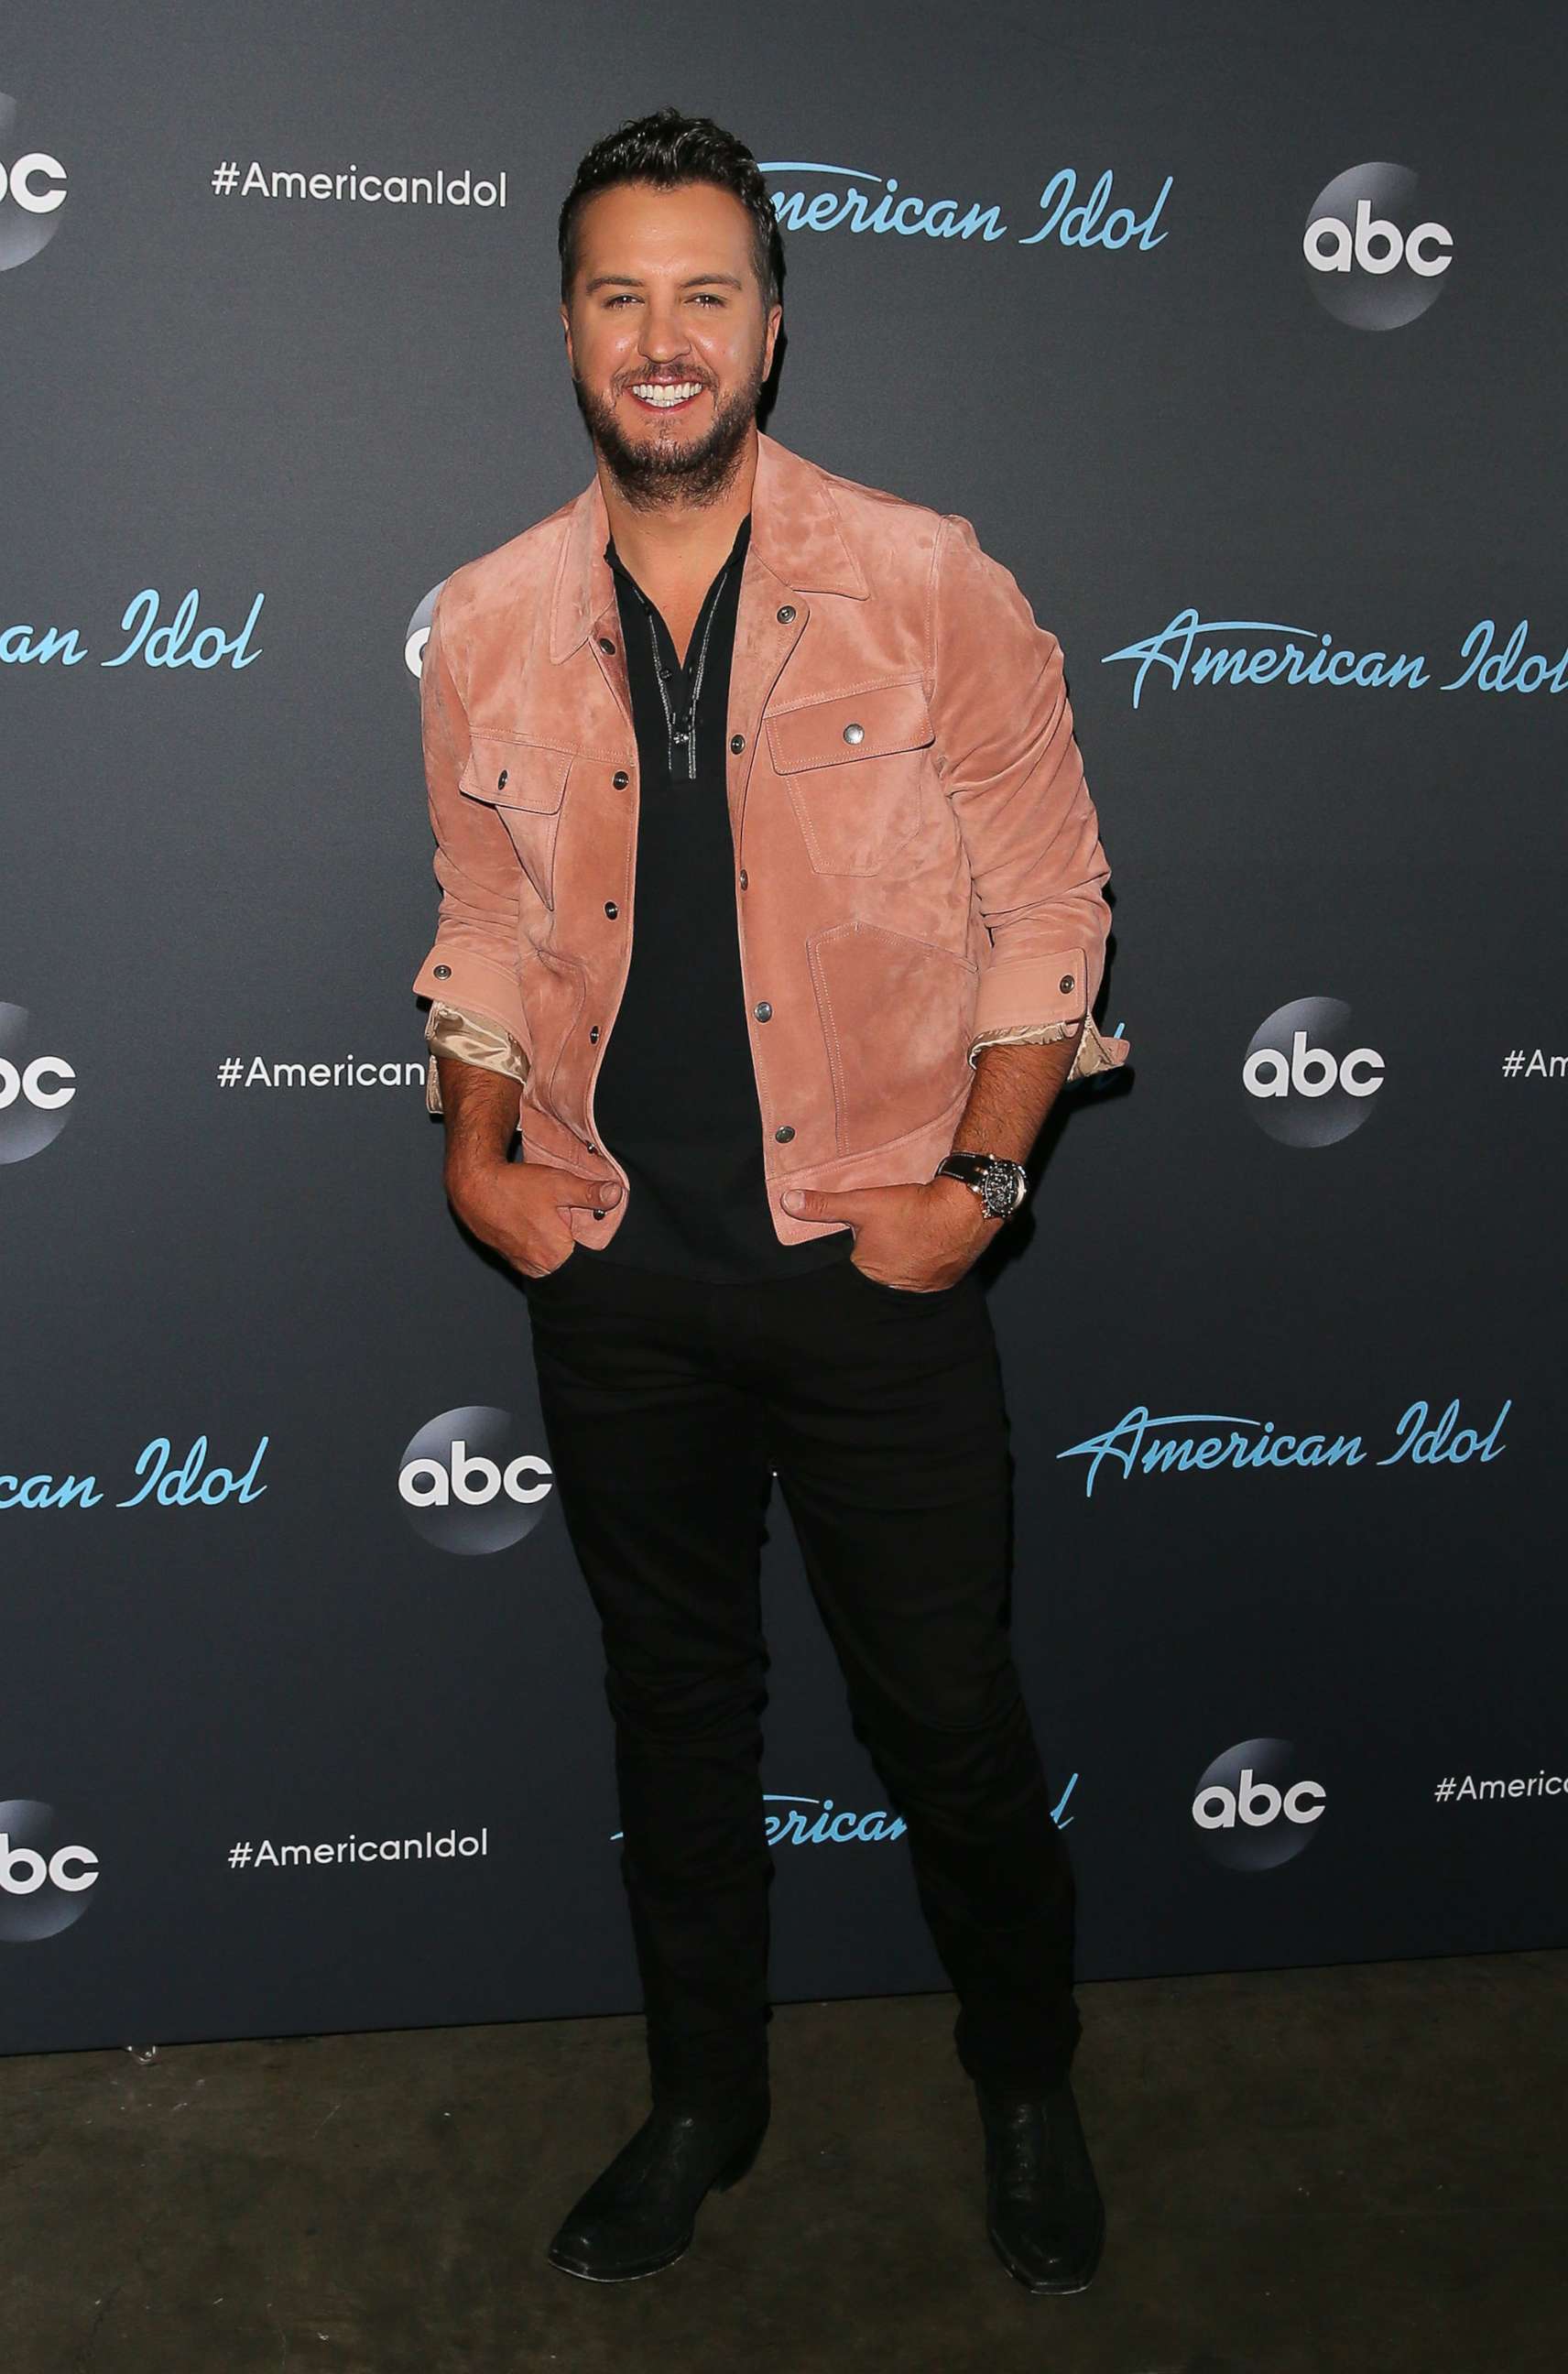 PHOTO: In this April 21, 2019, file photo, Luke Bryan attends the taping of ABC's 'American Idol' in Los Angeles.